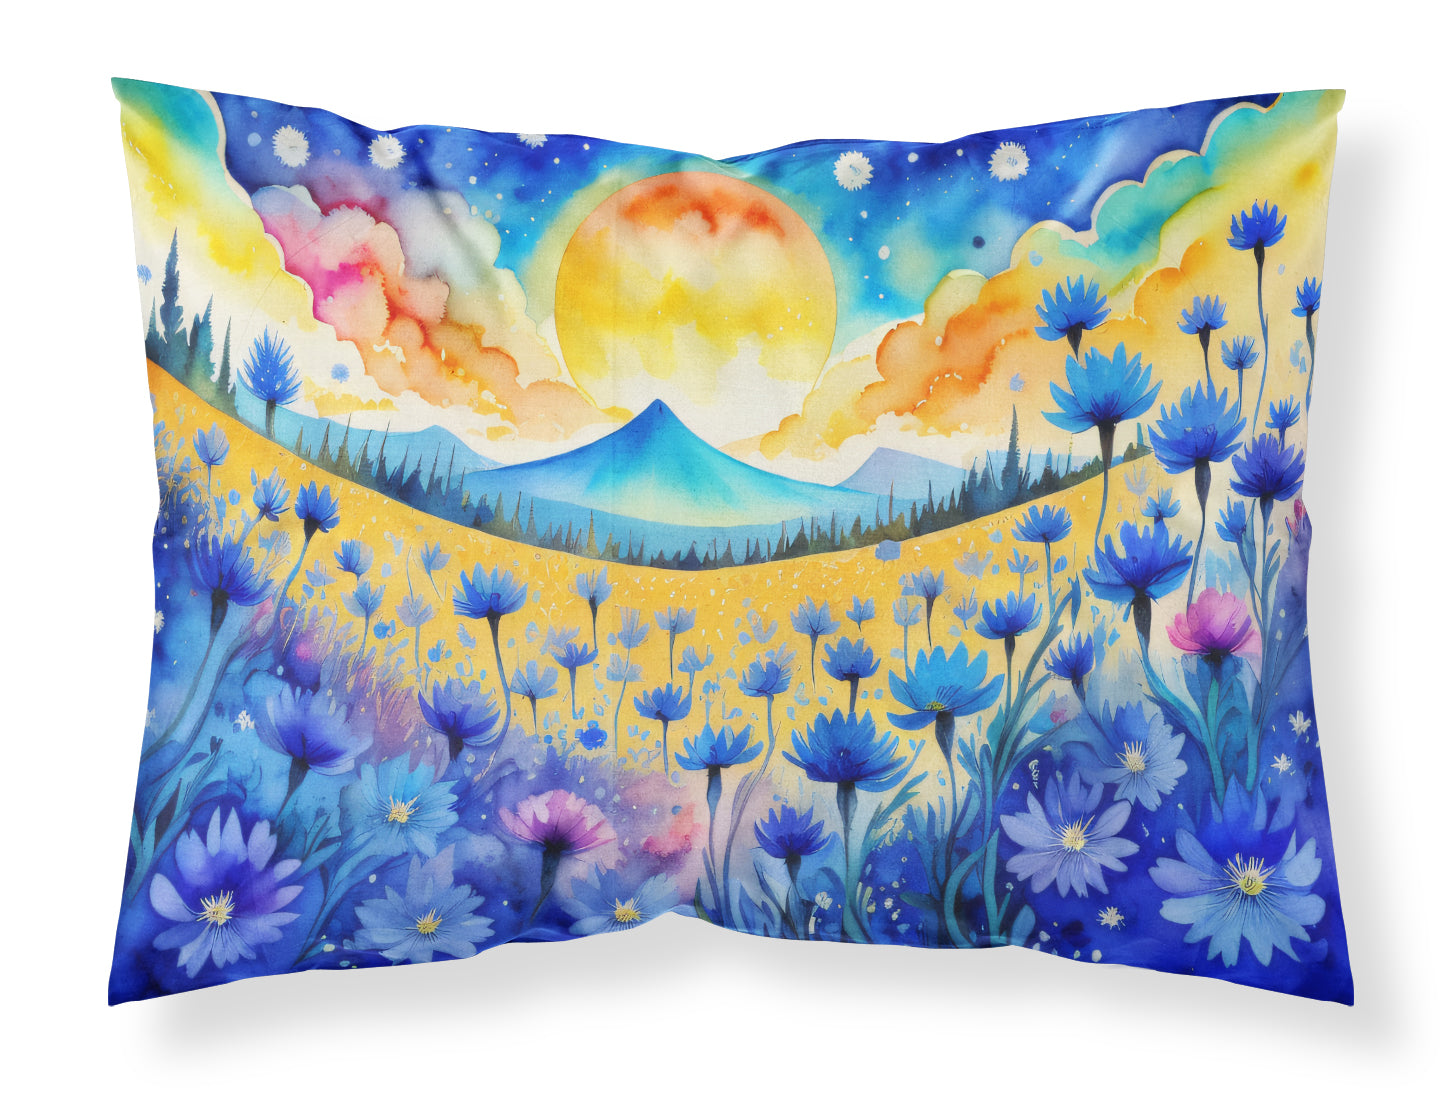 Buy this Blue Cornflowers in Color Fabric Standard Pillowcase